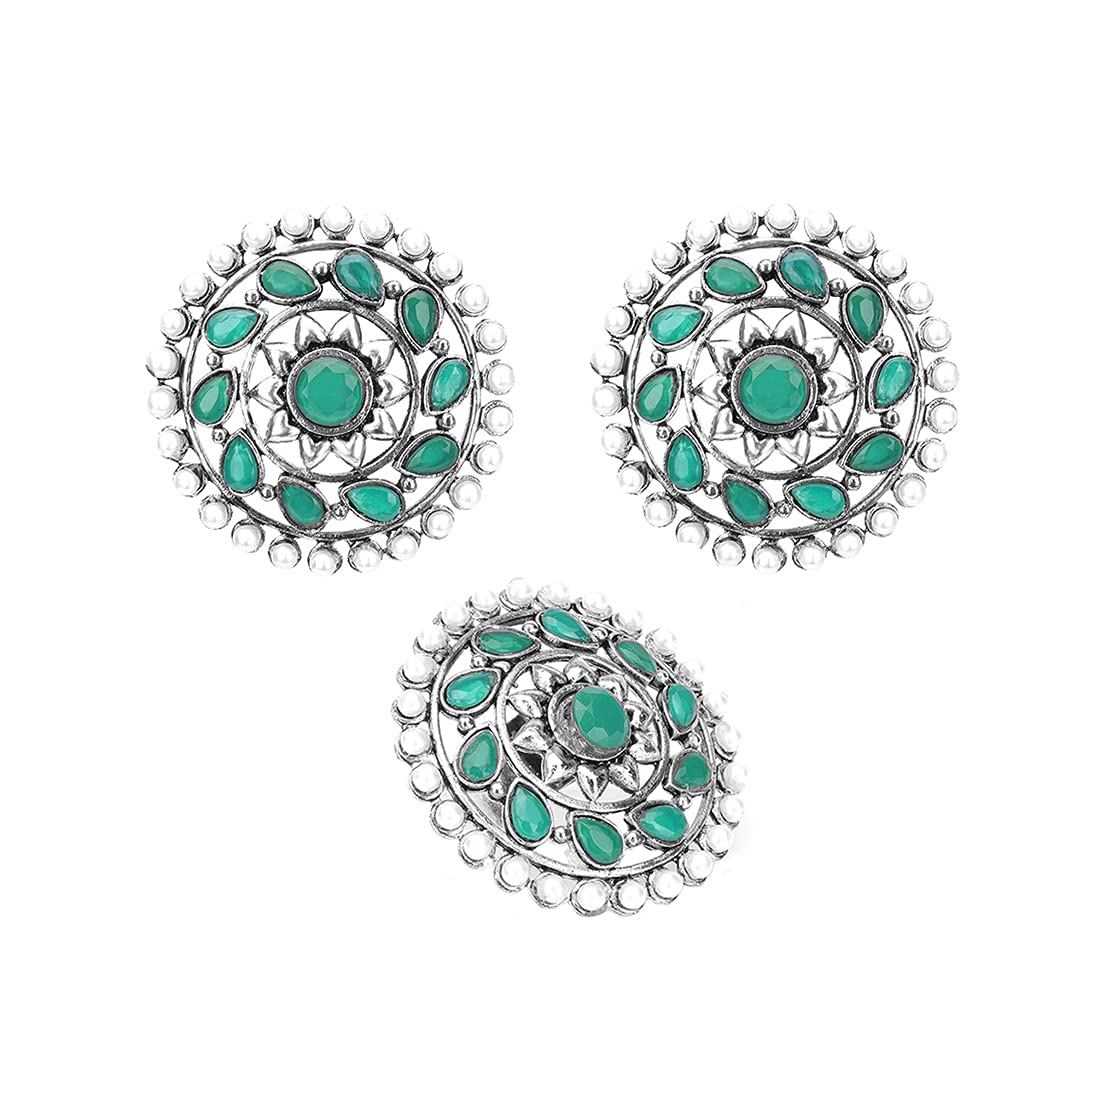 Yellow Chimes Ethnic German Silver Oxidised Green Studded stones Round Traditional Stud Earrings and Ring Set for Women And Girls, Silver, Green, Medium (Model Number: YCTJER-89STNCIRST-GR)